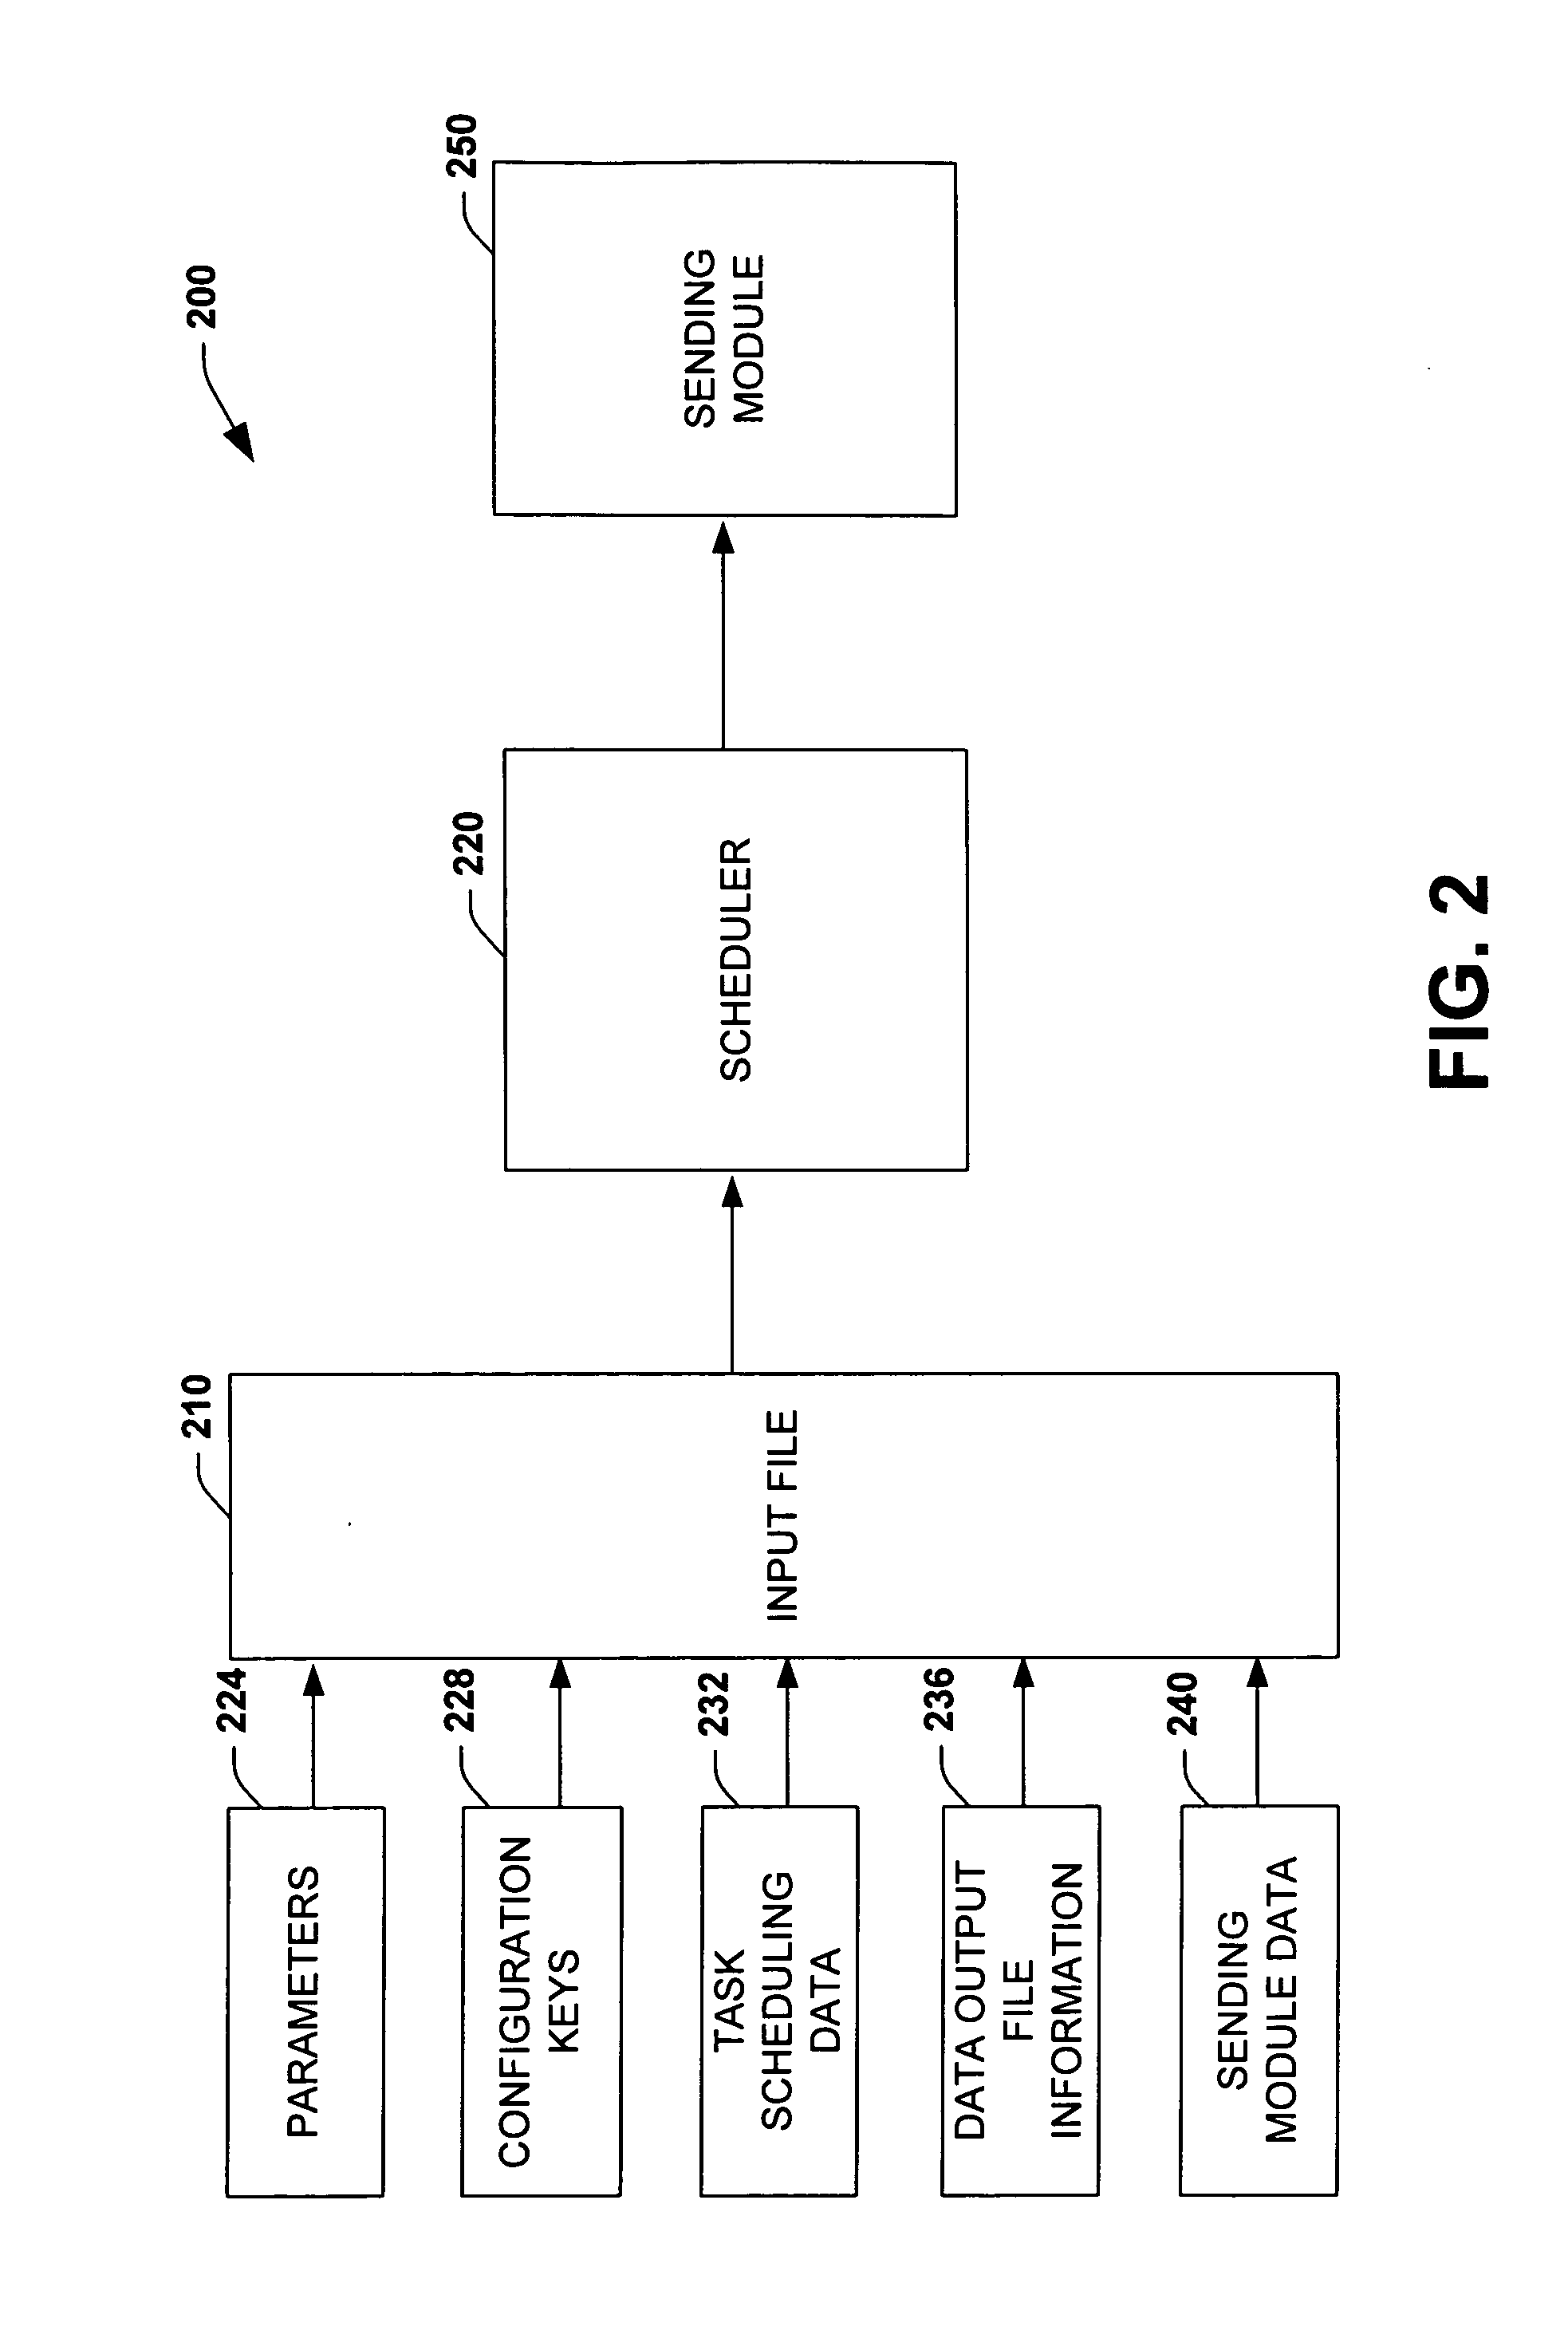 Systems and methods for collecting, representing, transmitting, and interpreting usage and state data for software